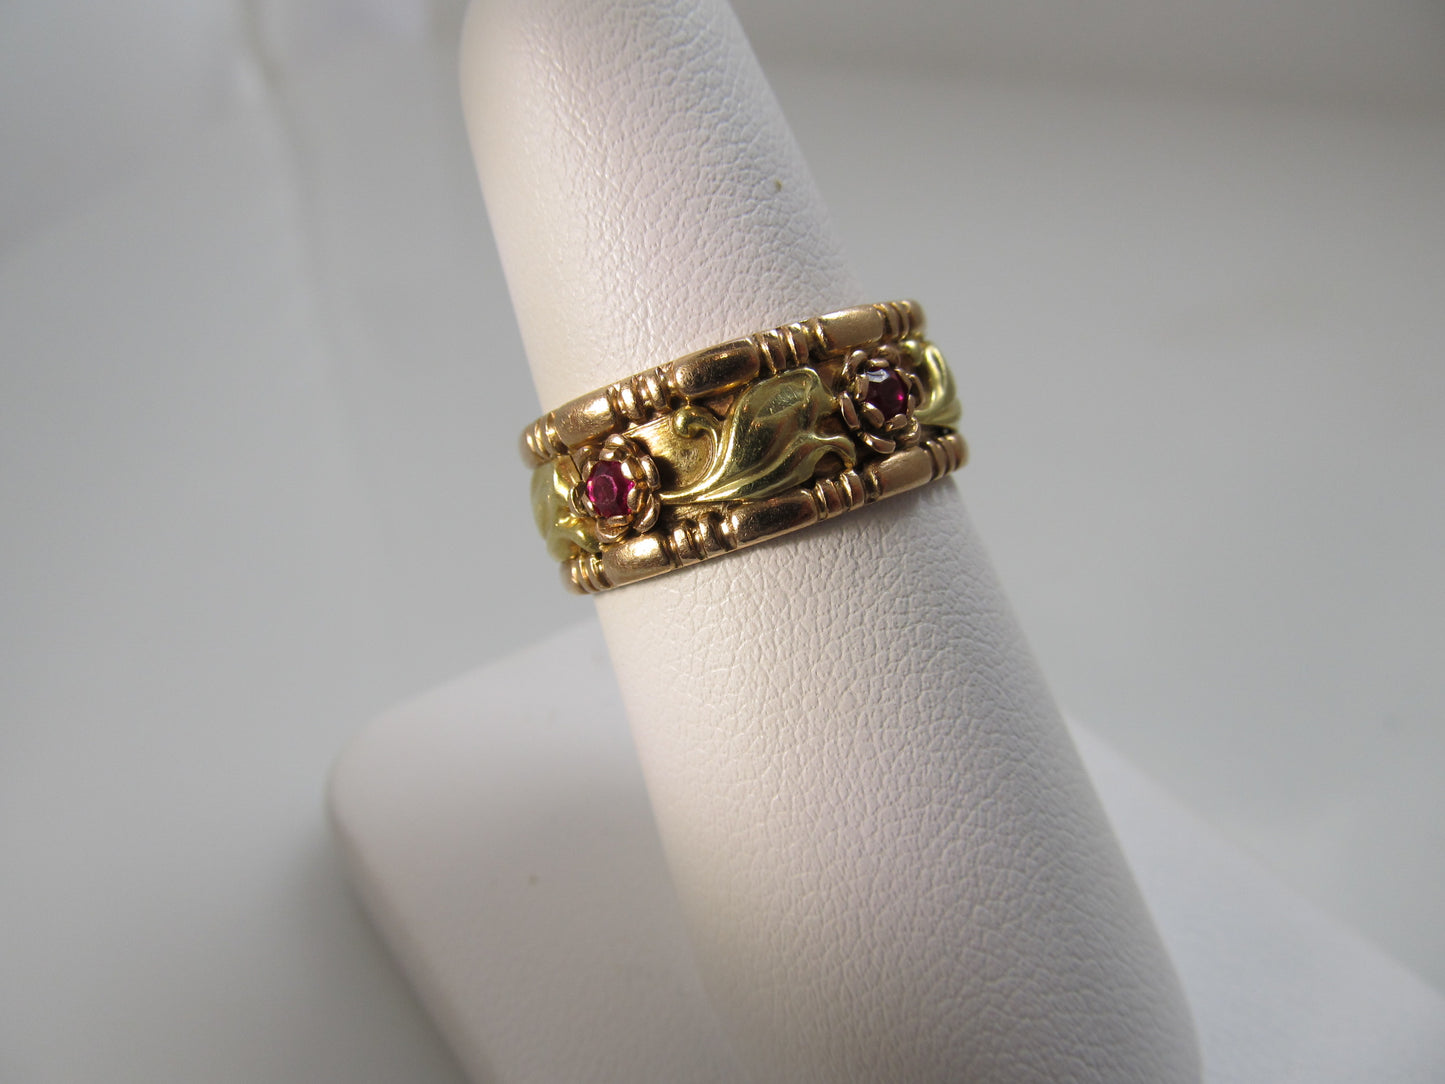 Vintage retro 14k rose and yellow gold ruby band